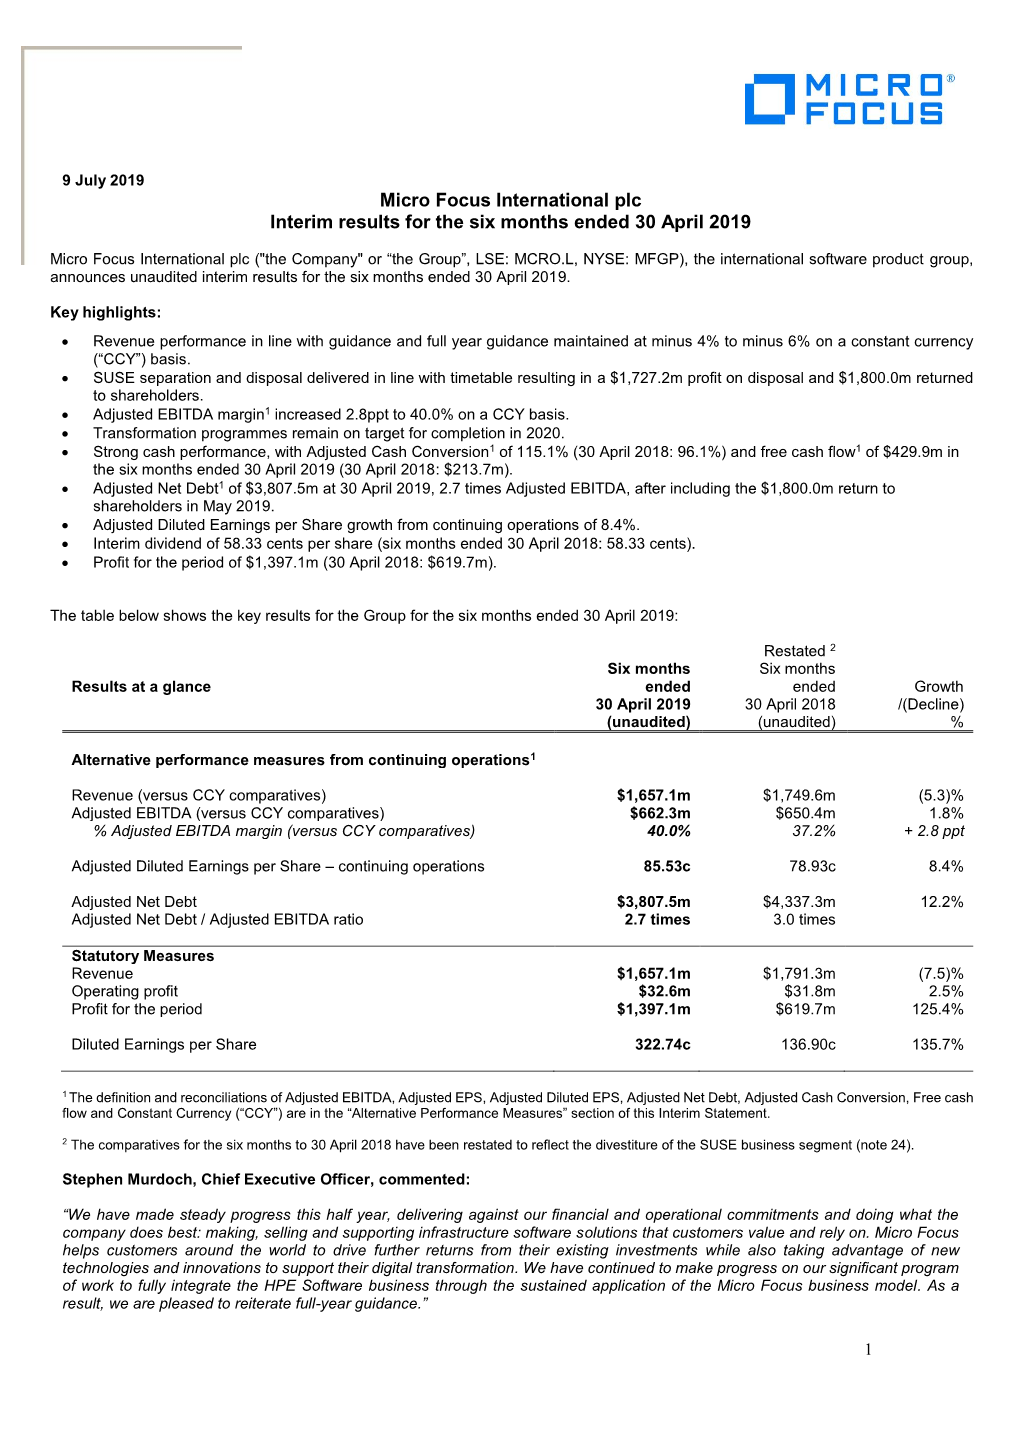 Micro Focus International Plc Interim Results for the Six Months Ended 30 April 2019